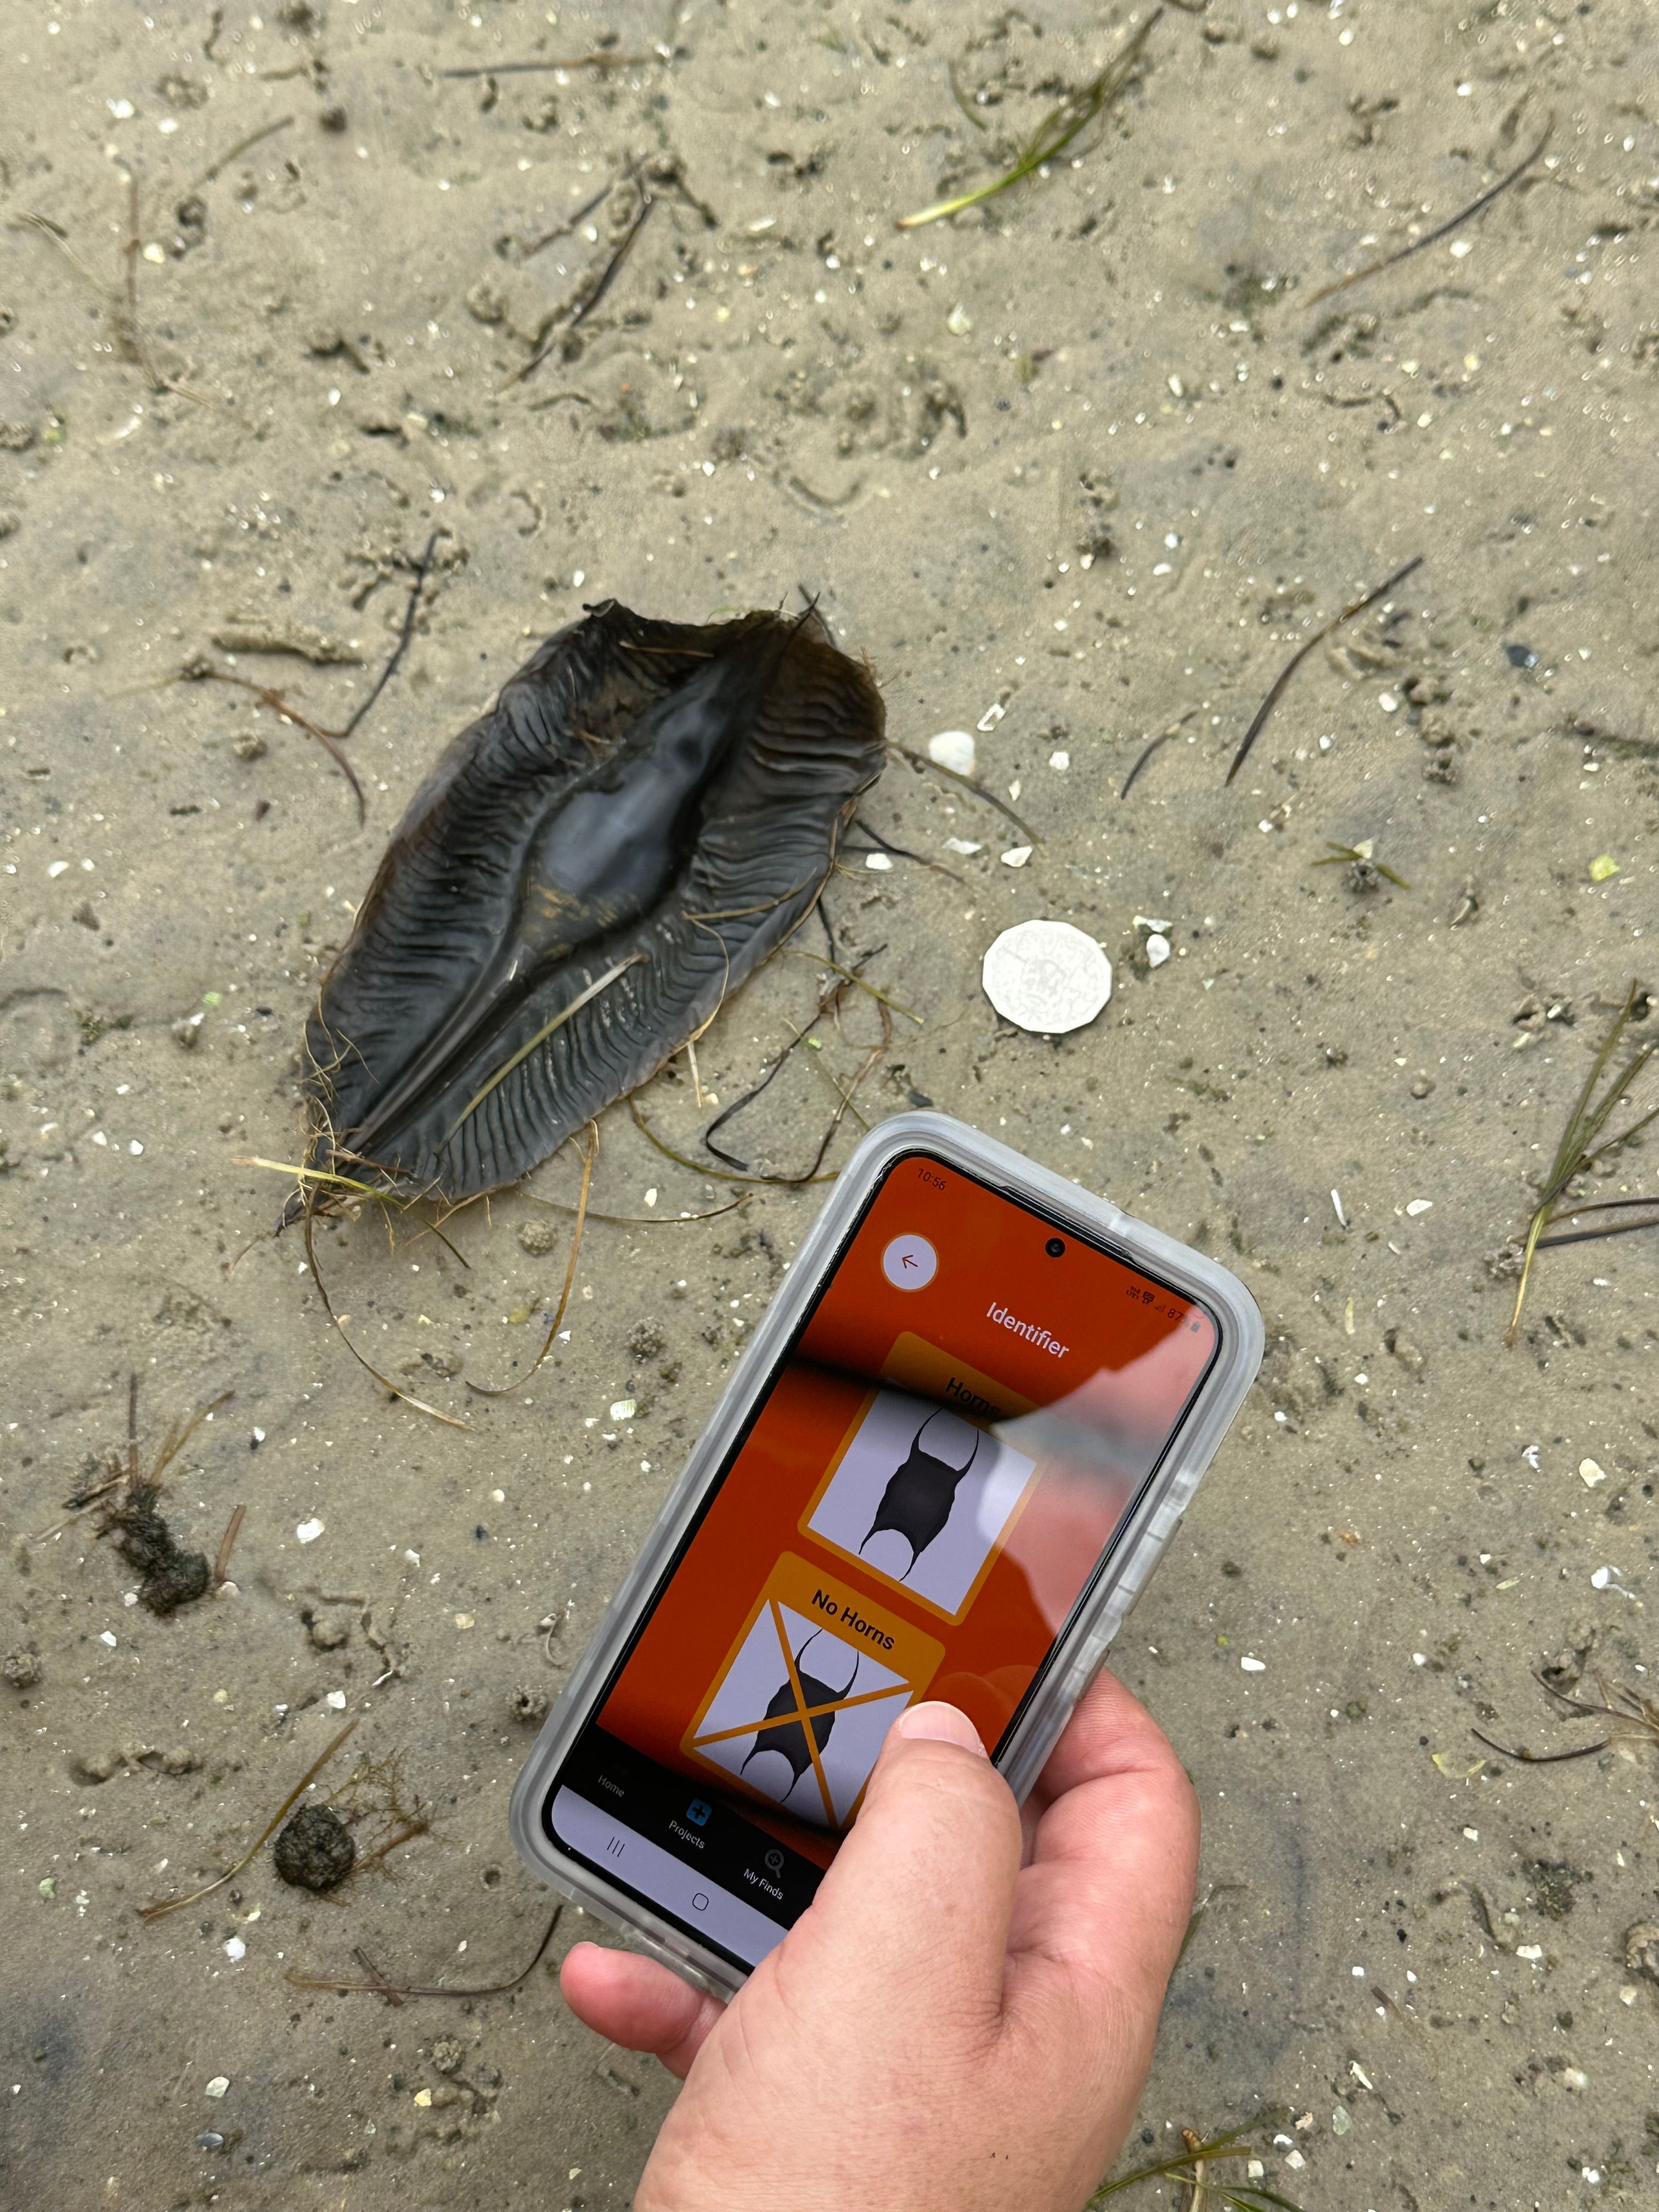 A hand holds a phone displaying different shapes near a dark, alien-looking egg case on damp sand